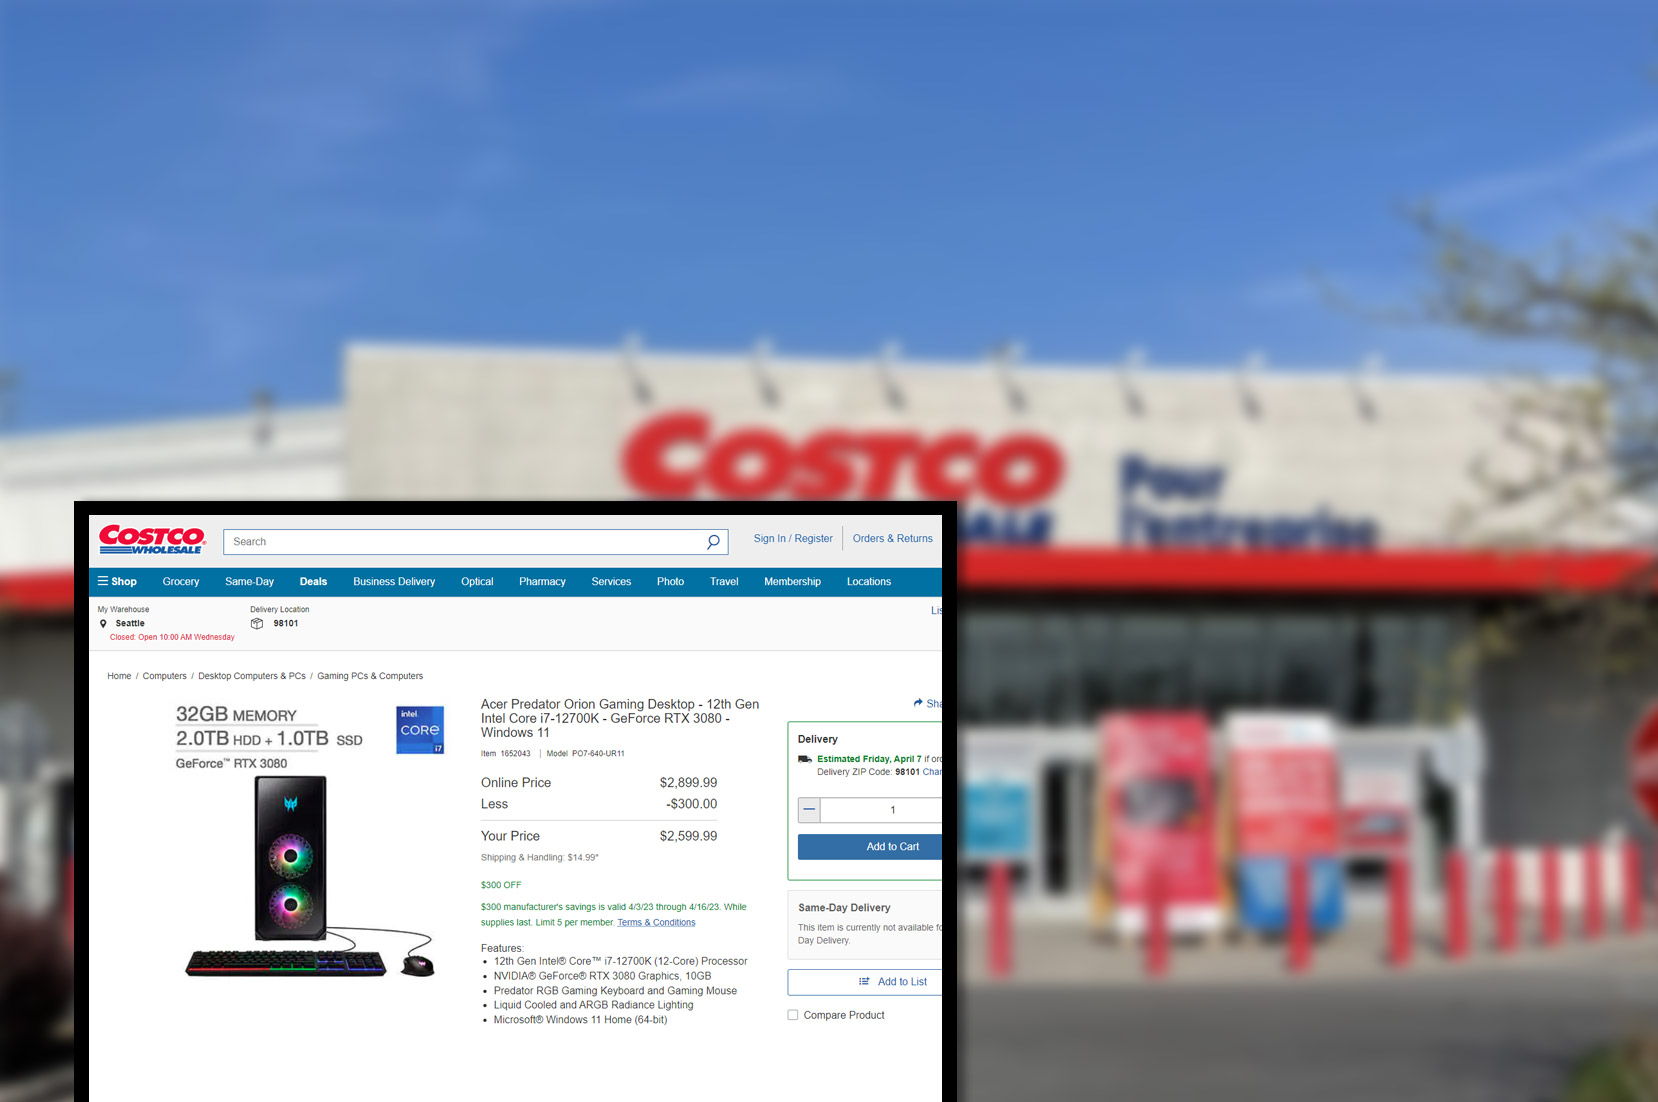 costco-comproduct-pricing-information-and-image-scraping-services